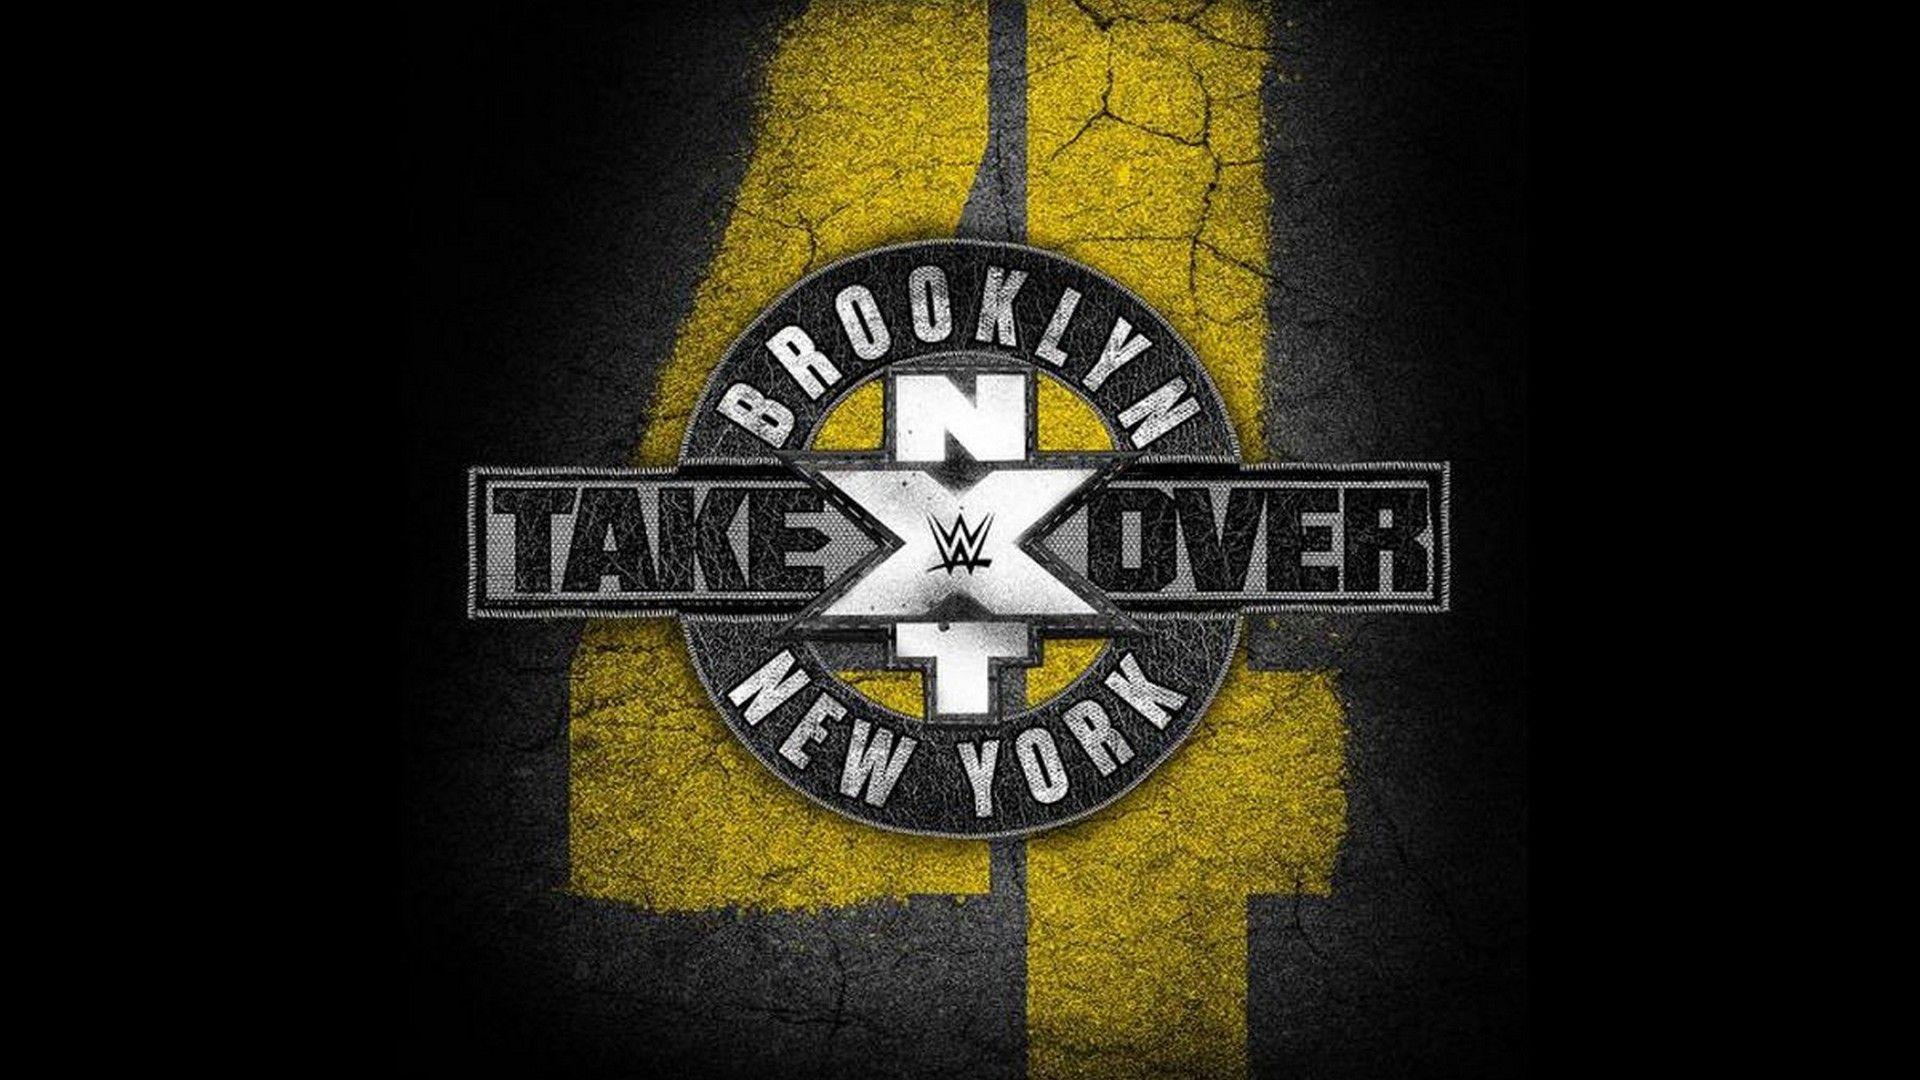 NXT WWE HD Wallpaper. Nxt takeover, Wwe, Wwe events